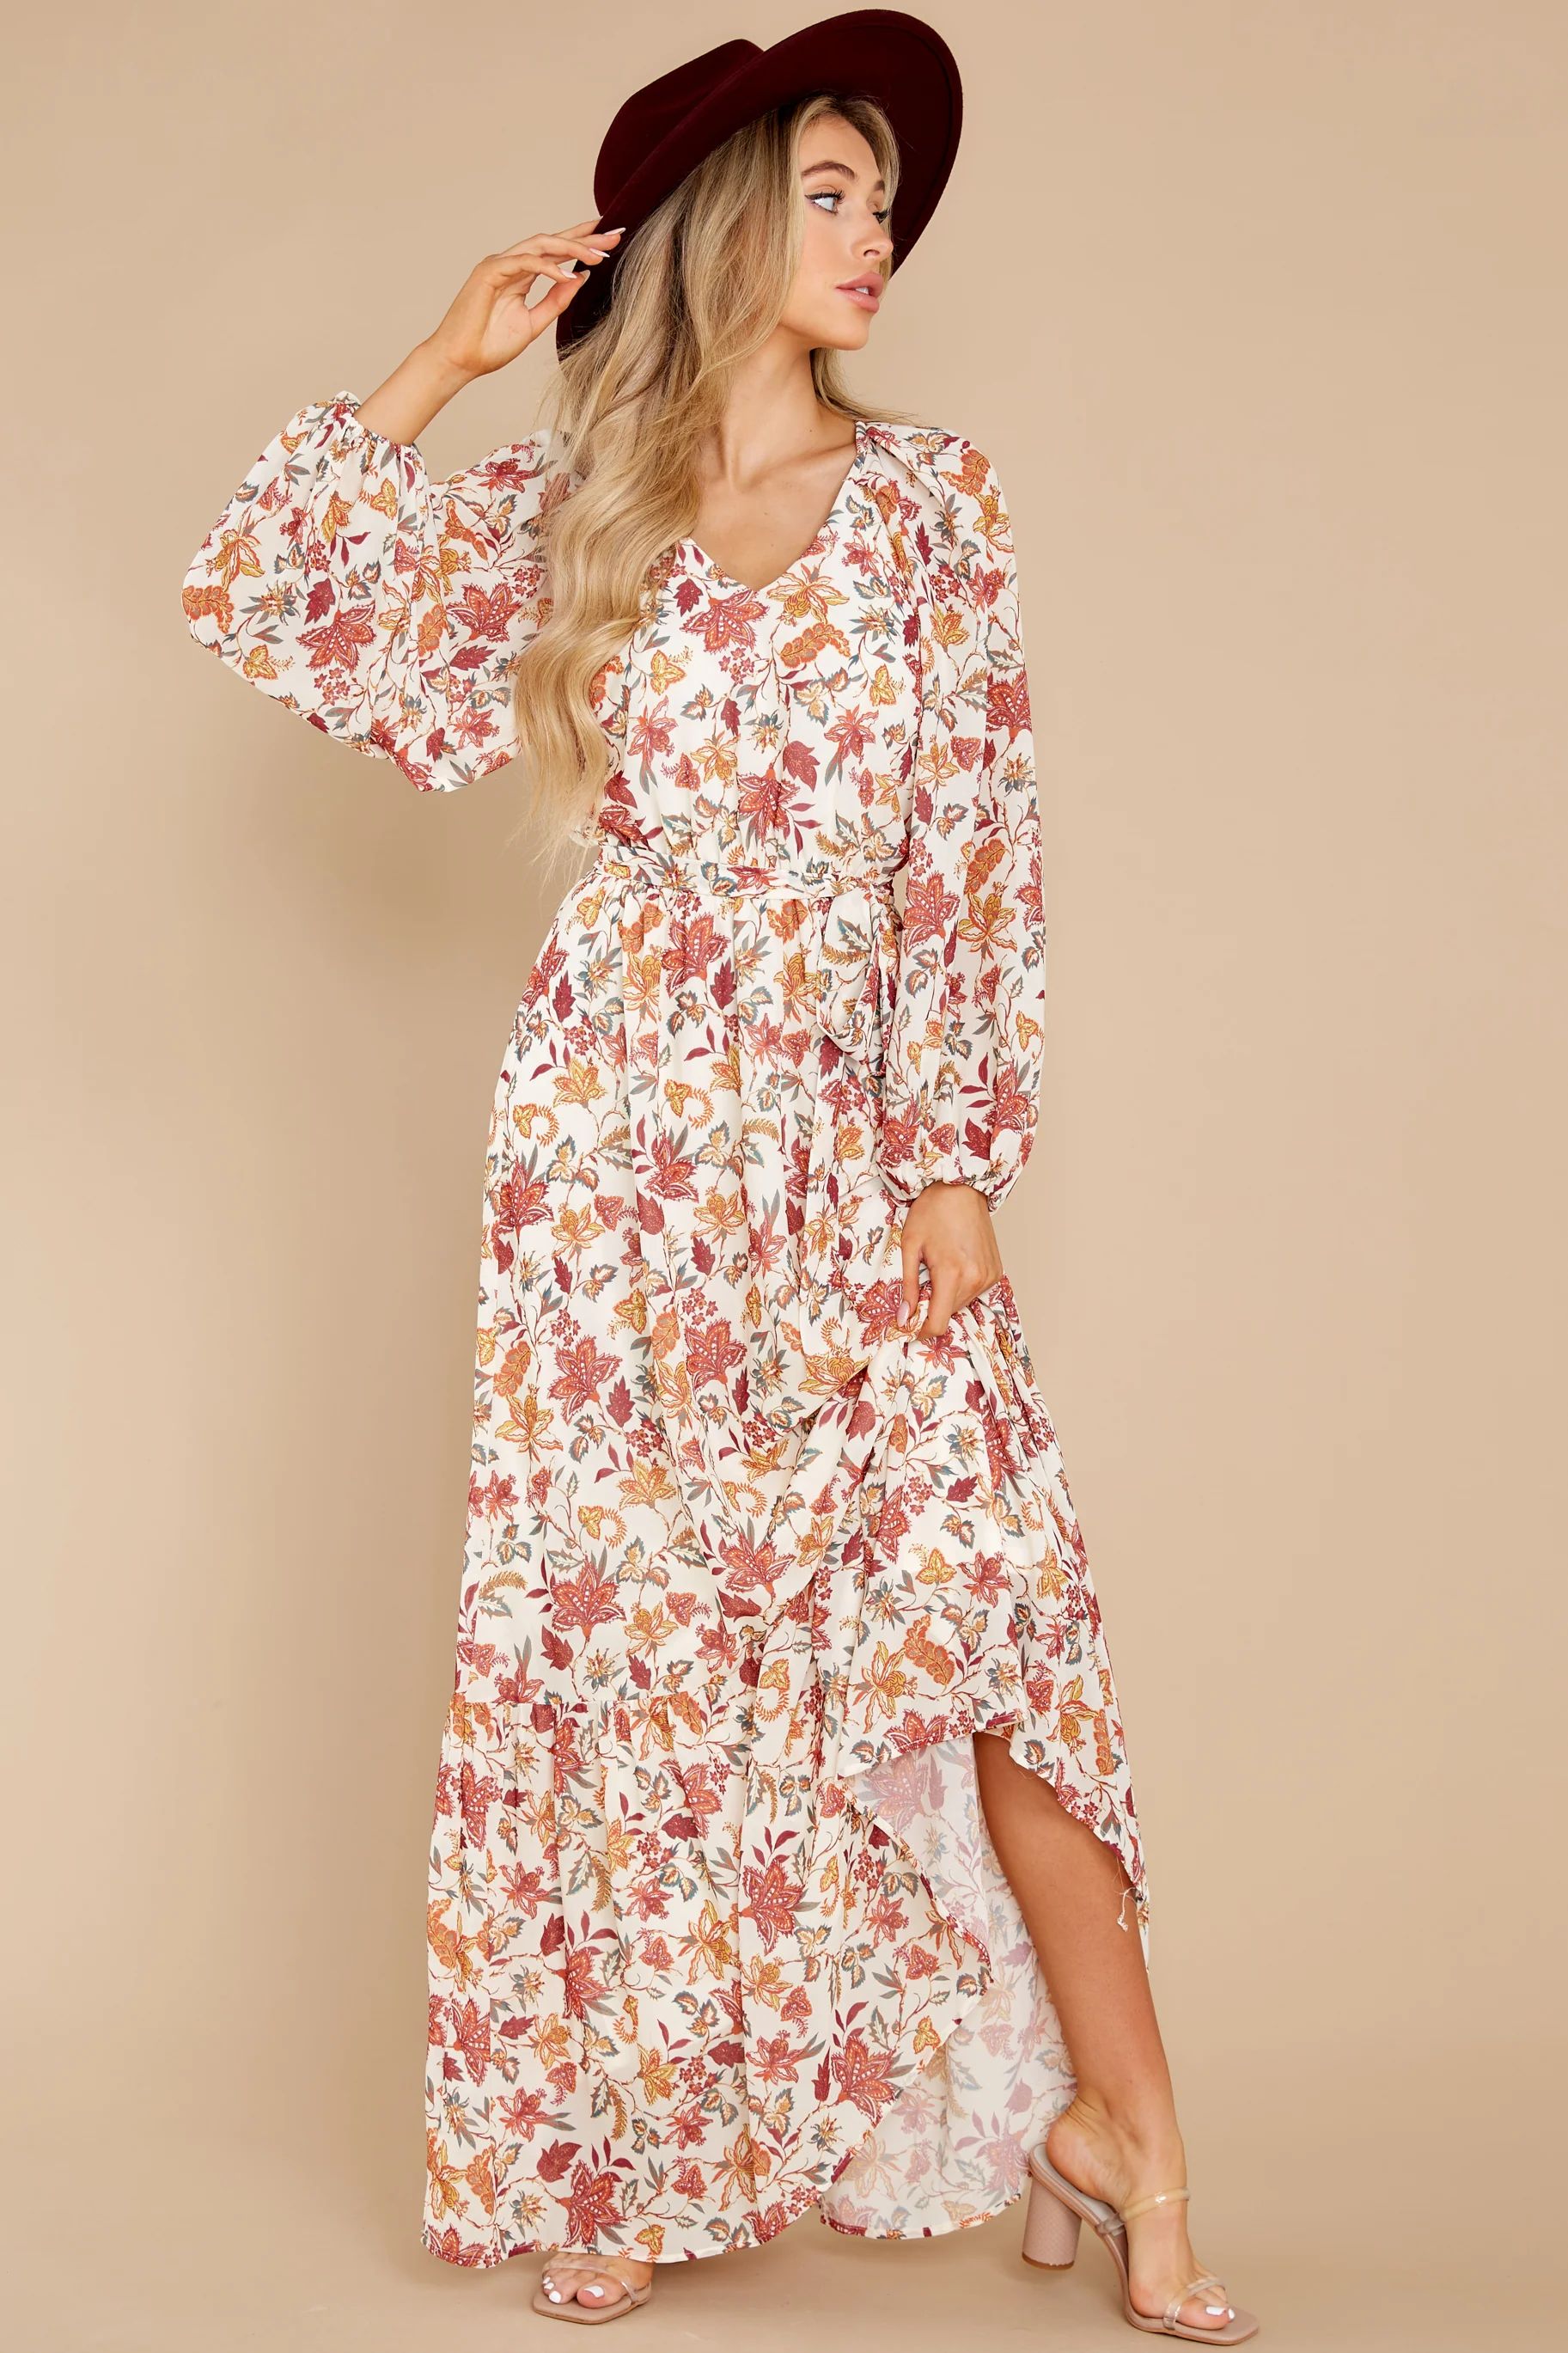 Favorable Outcome Ivory And Burgundy Floral Print Maxi Dress | Red Dress 